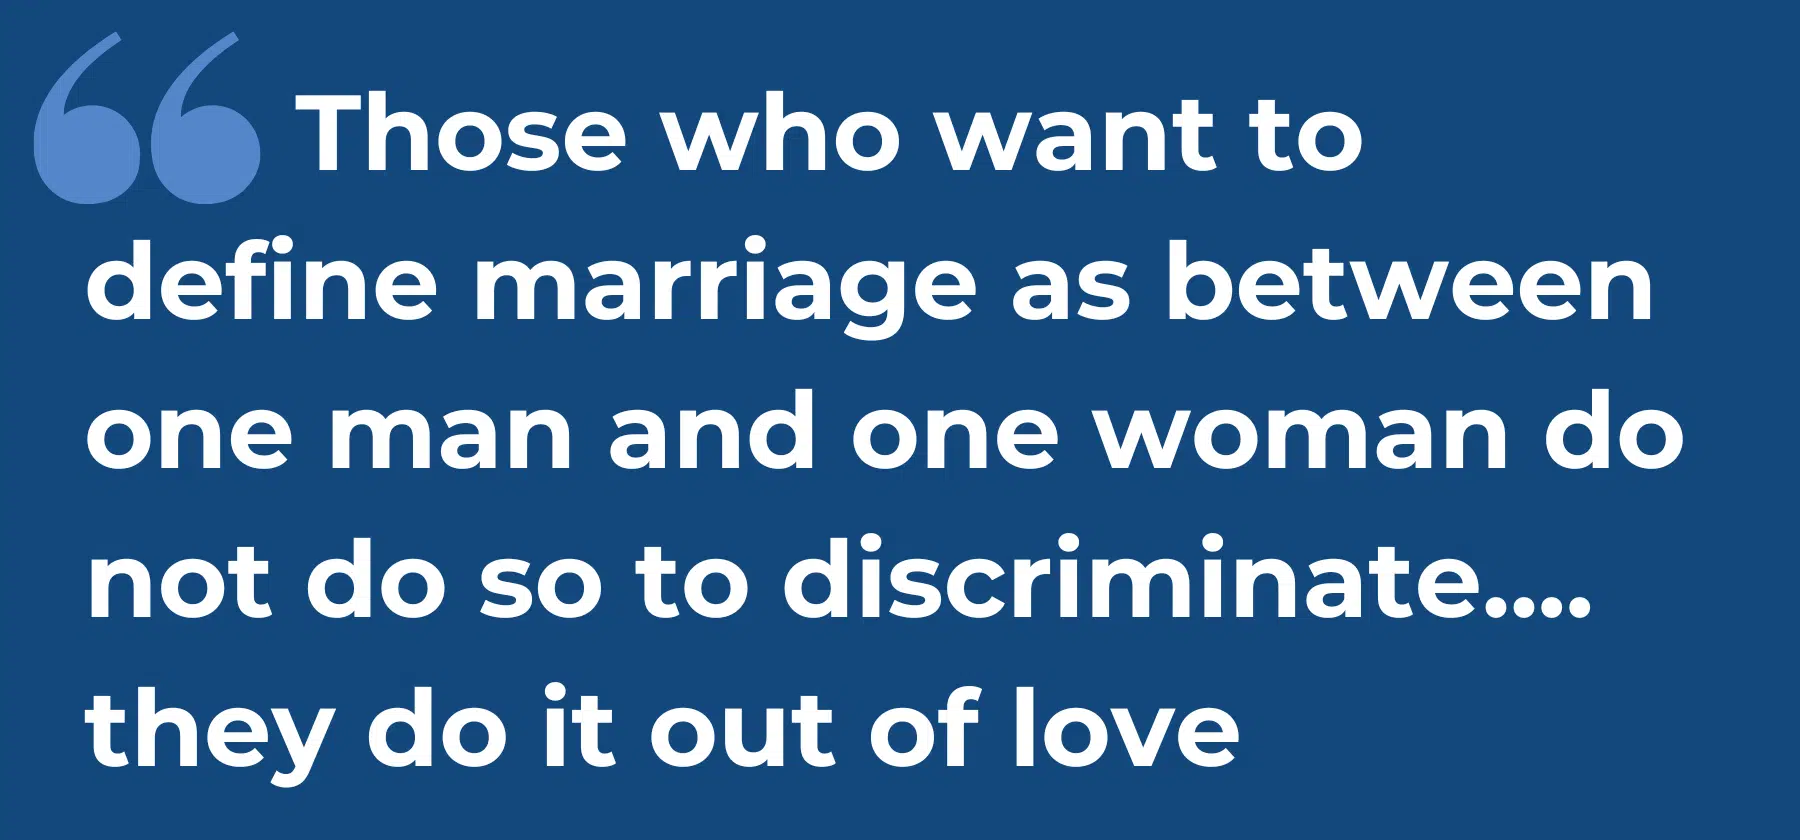 those who want to define marriage as between one man and one woman do not do so to discriminate, they do it out of love